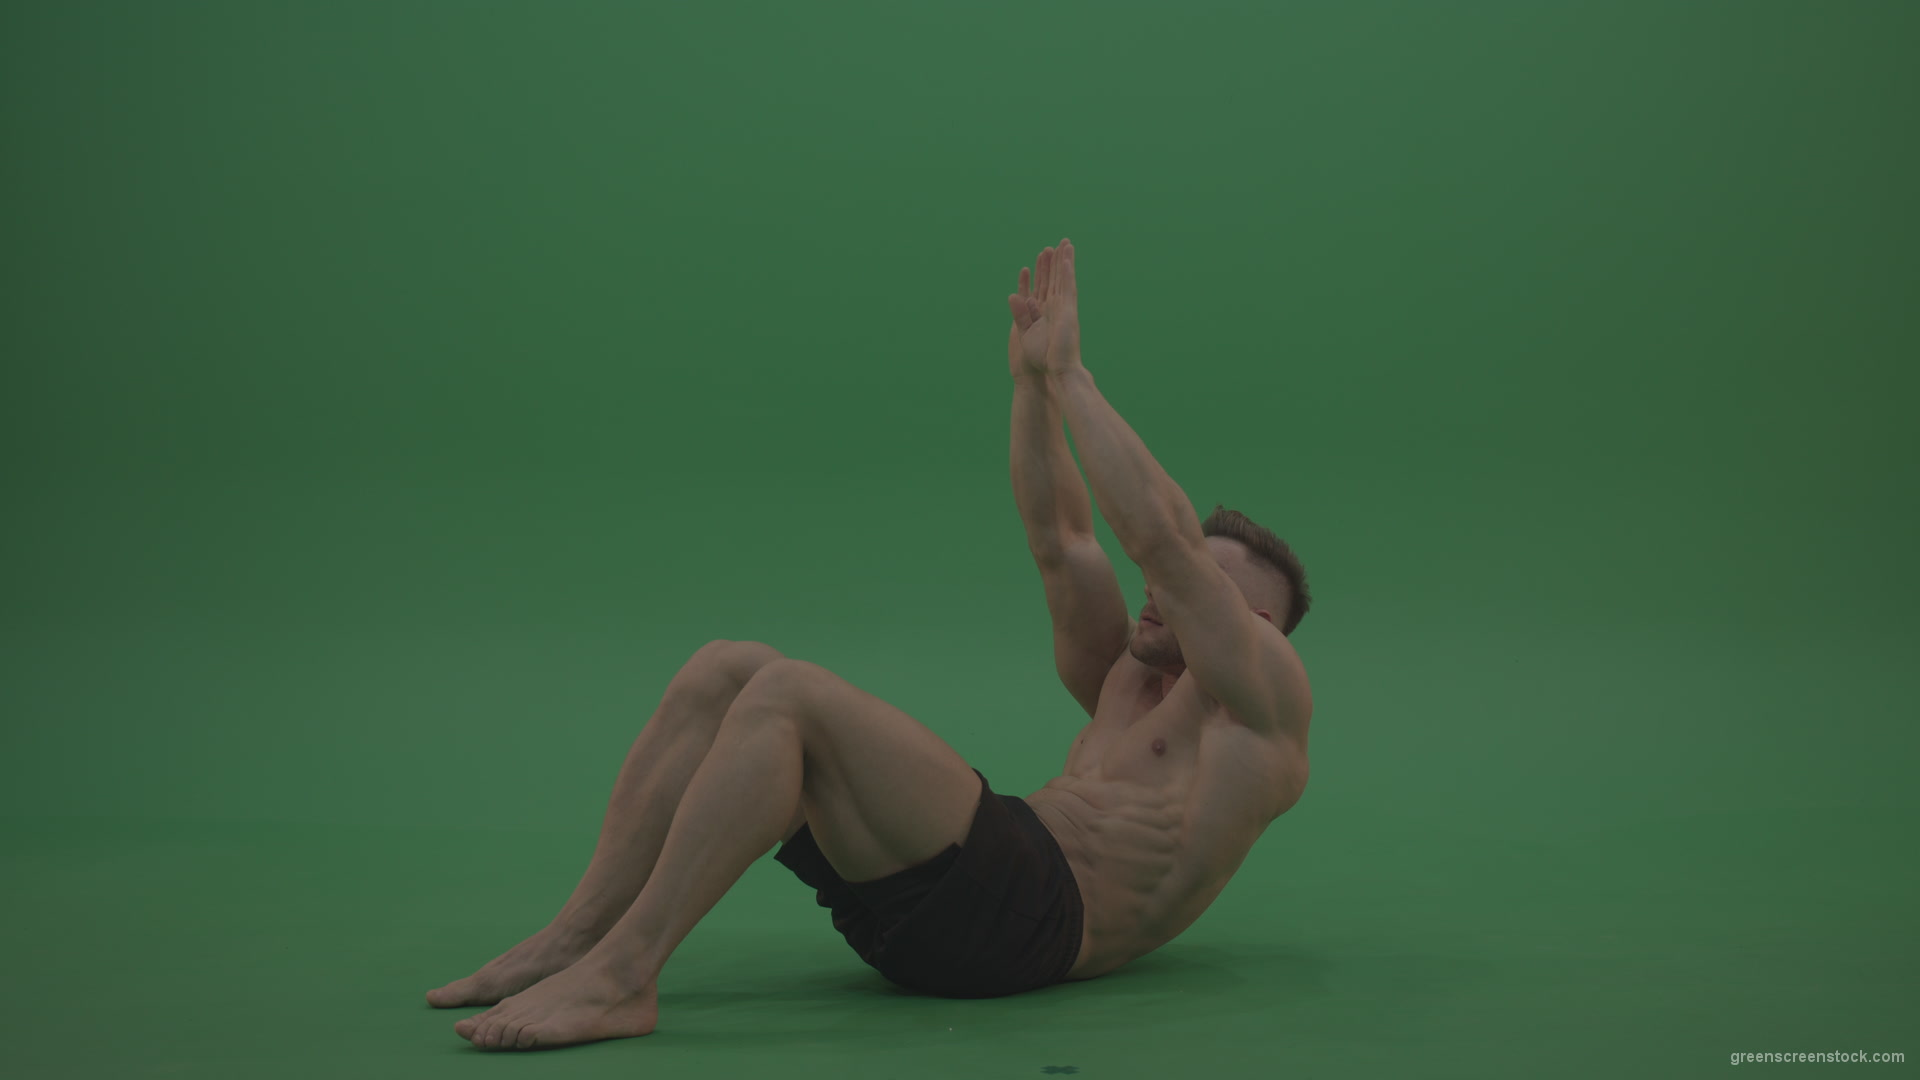 Young_Bodybuilding_Athletic_Sportsman_Showing_Excercise_Technique_For_Abdominal_And_Thigh_Muscles_On_Green_Screen_Wall_Chroma_Key_Background_005 Green Screen Stock